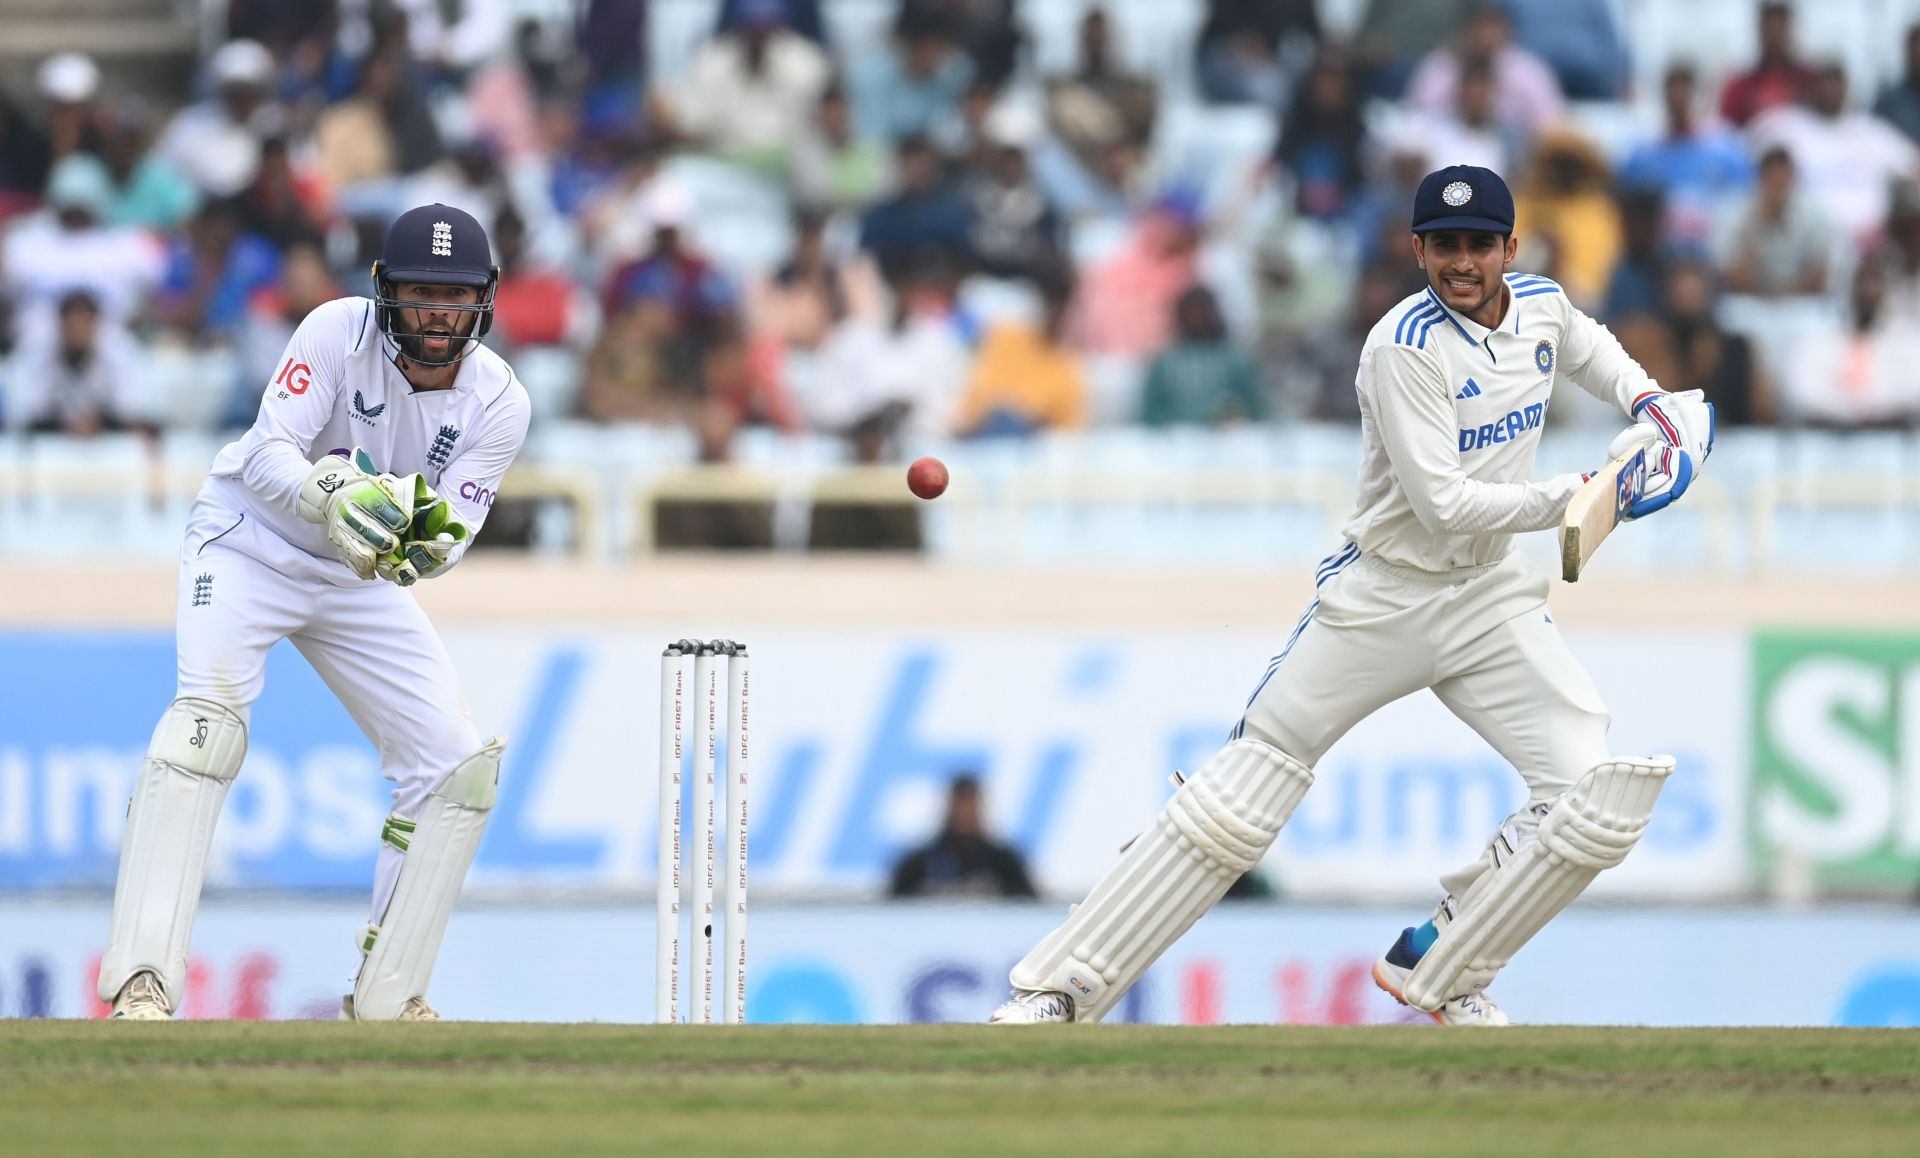 The 24-year-old has rediscovered his form in the ongoing Test series. (Pic: Getty Images)